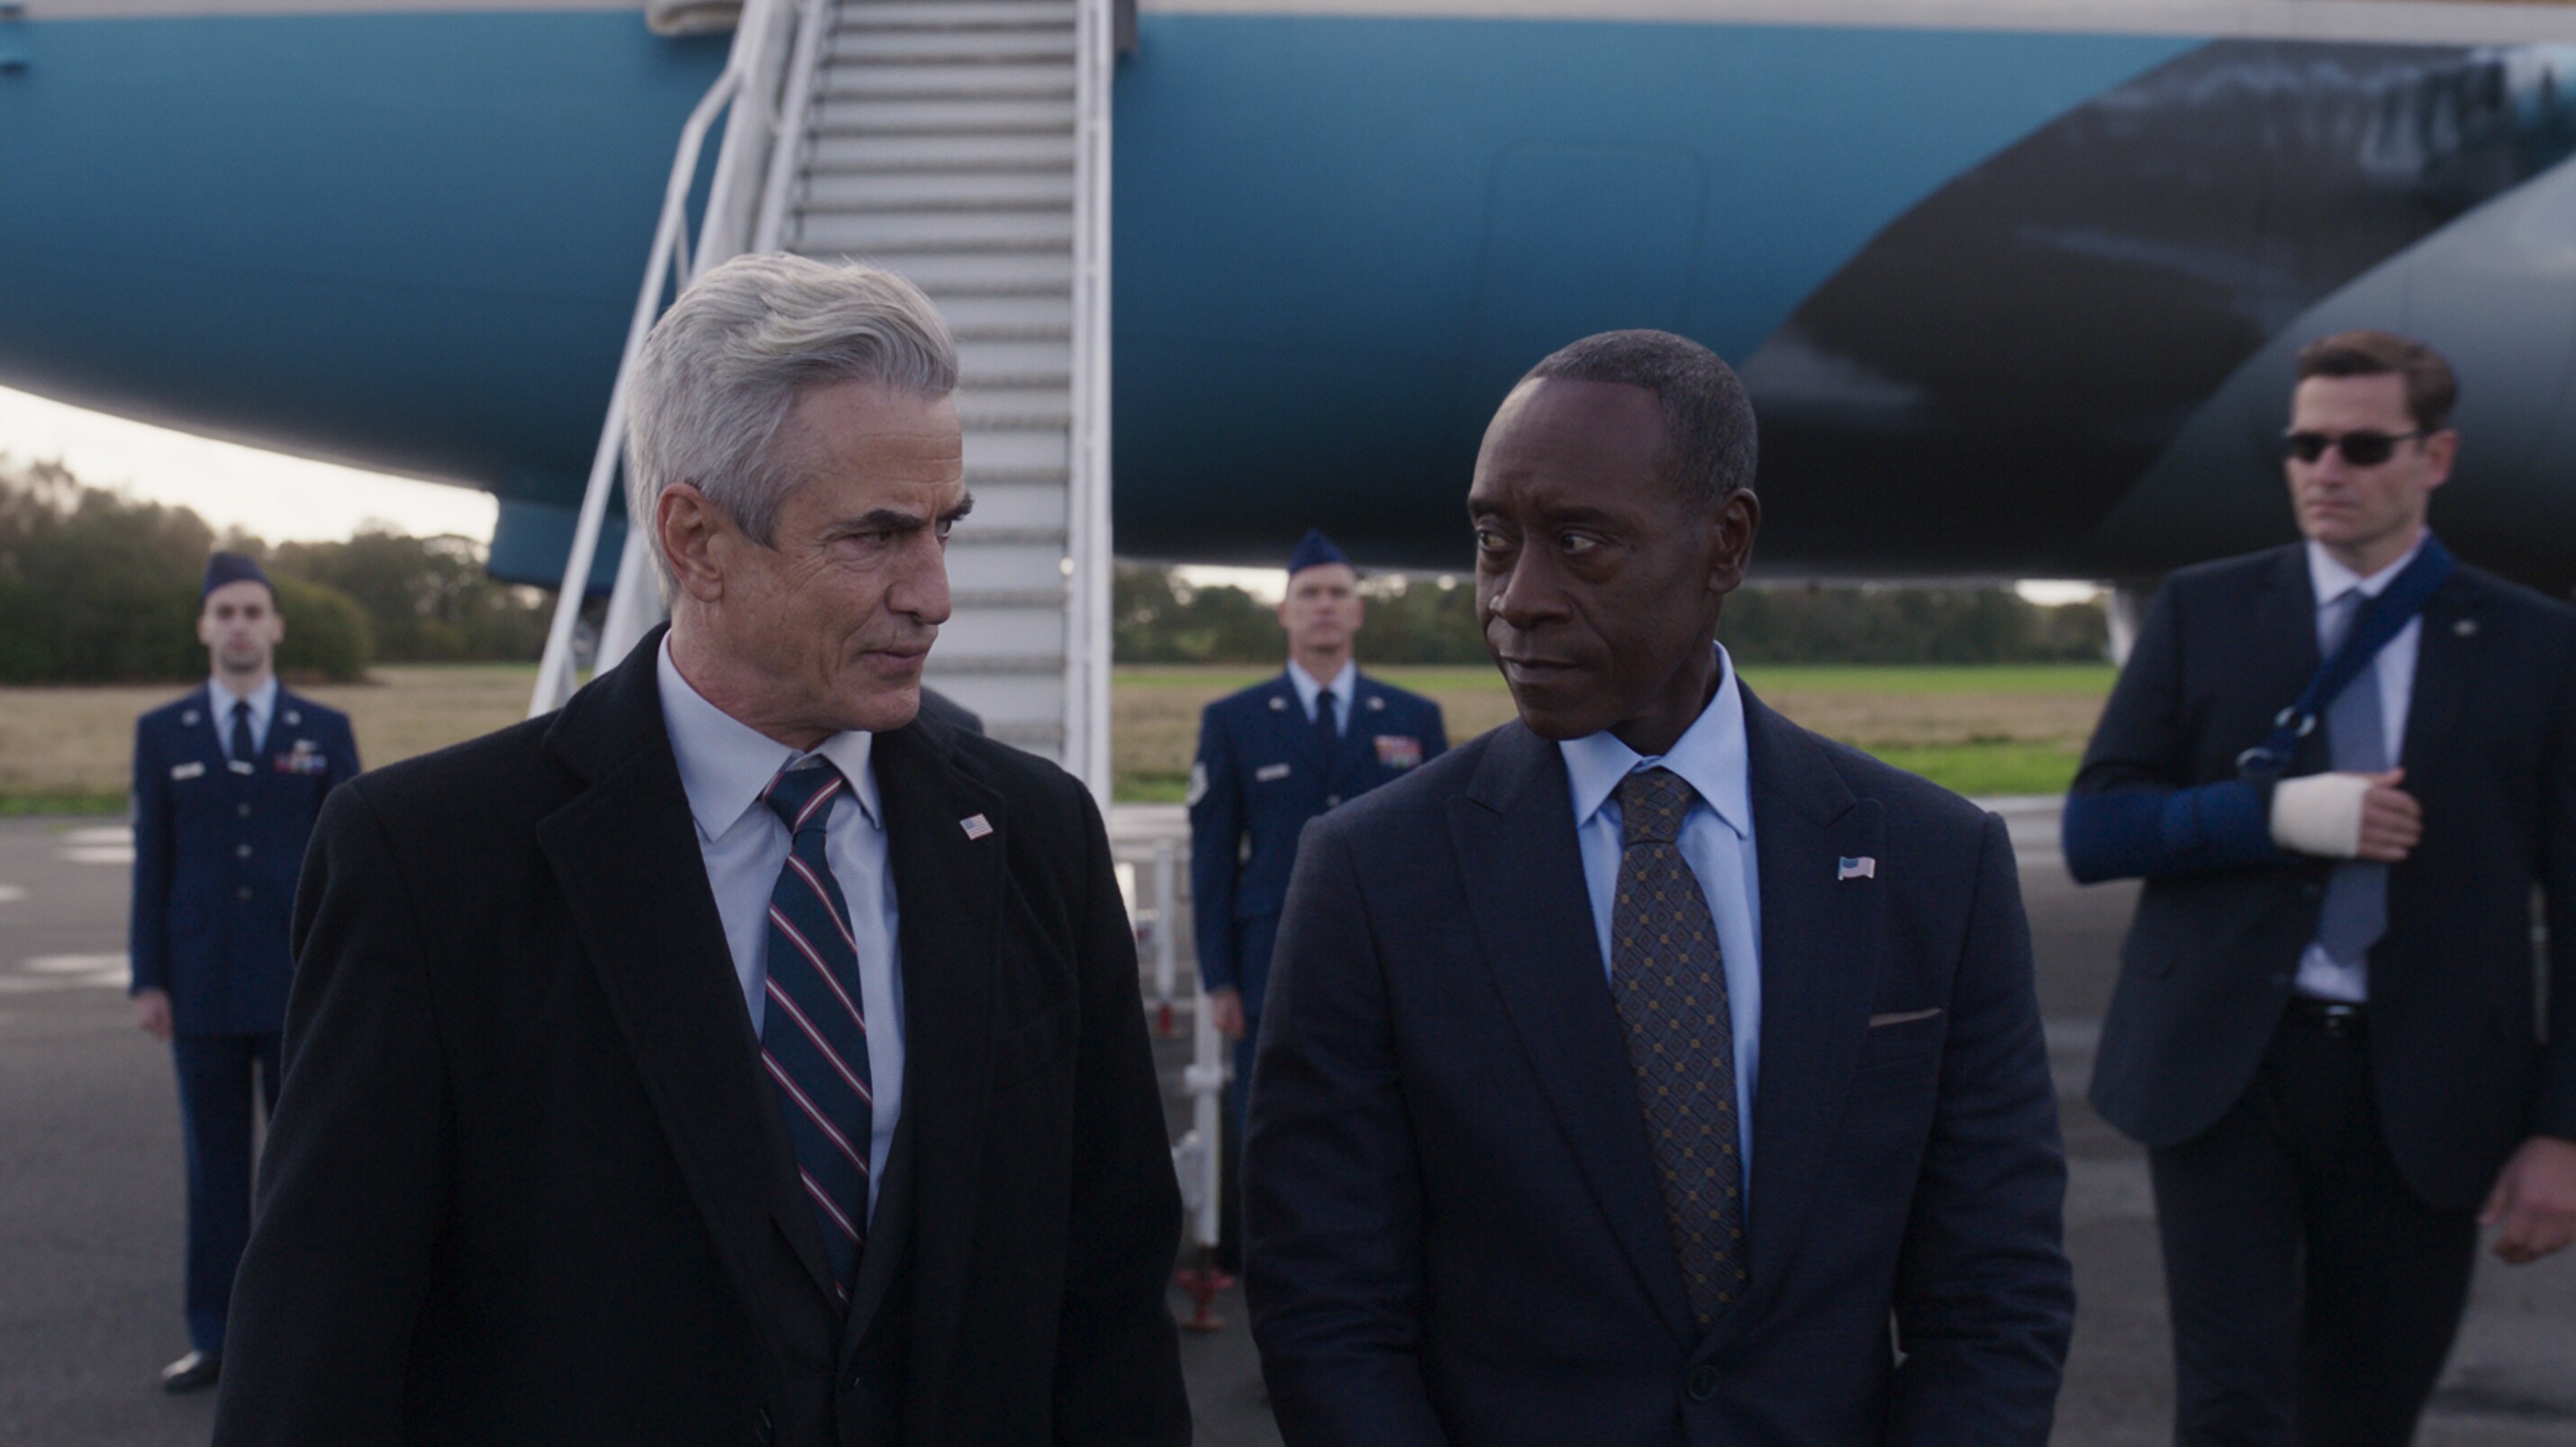 (L-R): Dermot Mulroney as President Ritson and Don Cheadle as James 'Rhodey' Rhodes in Marvel Studios' Secret Invasion, exclusively on Disney+. Photo courtesy of Marvel Studios. © 2023 MARVEL.